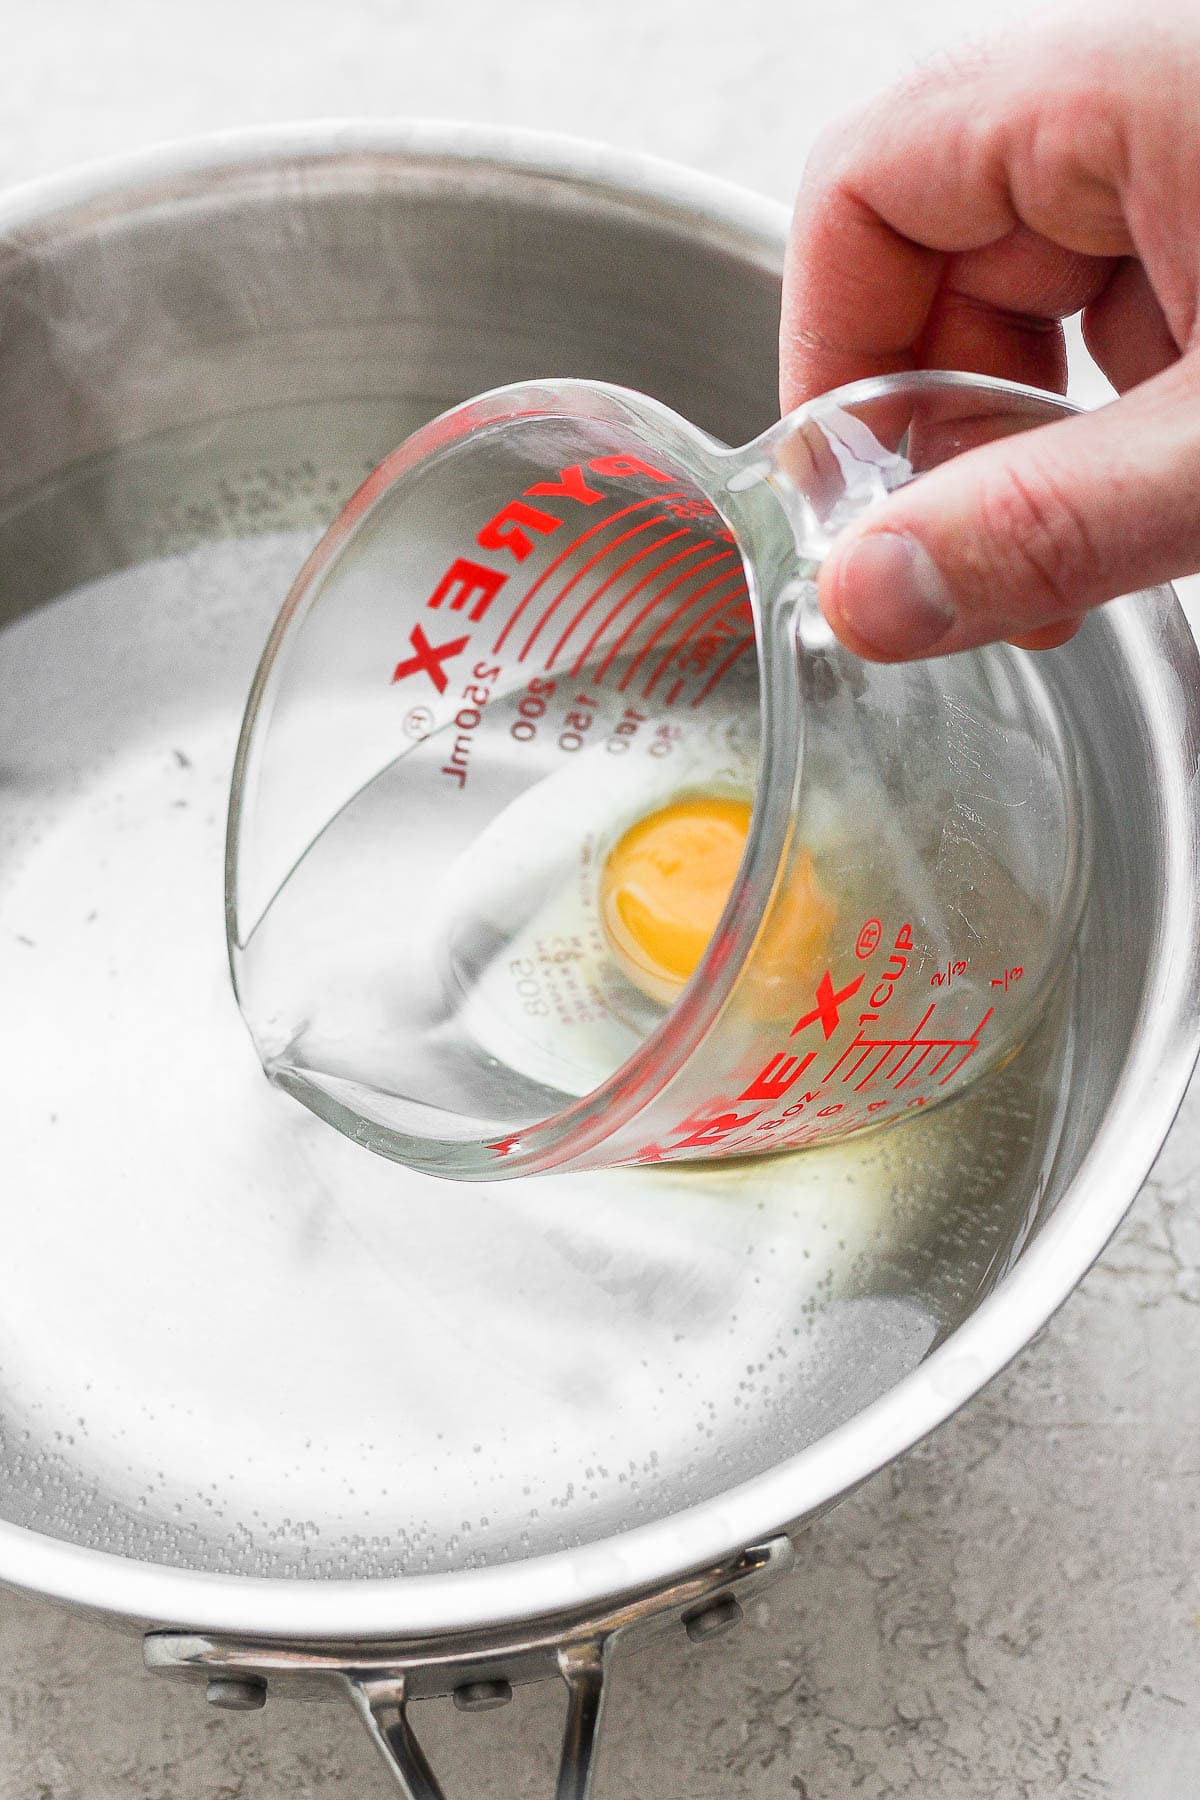 An egg in a glass measuring cup being lowered into simmering water.